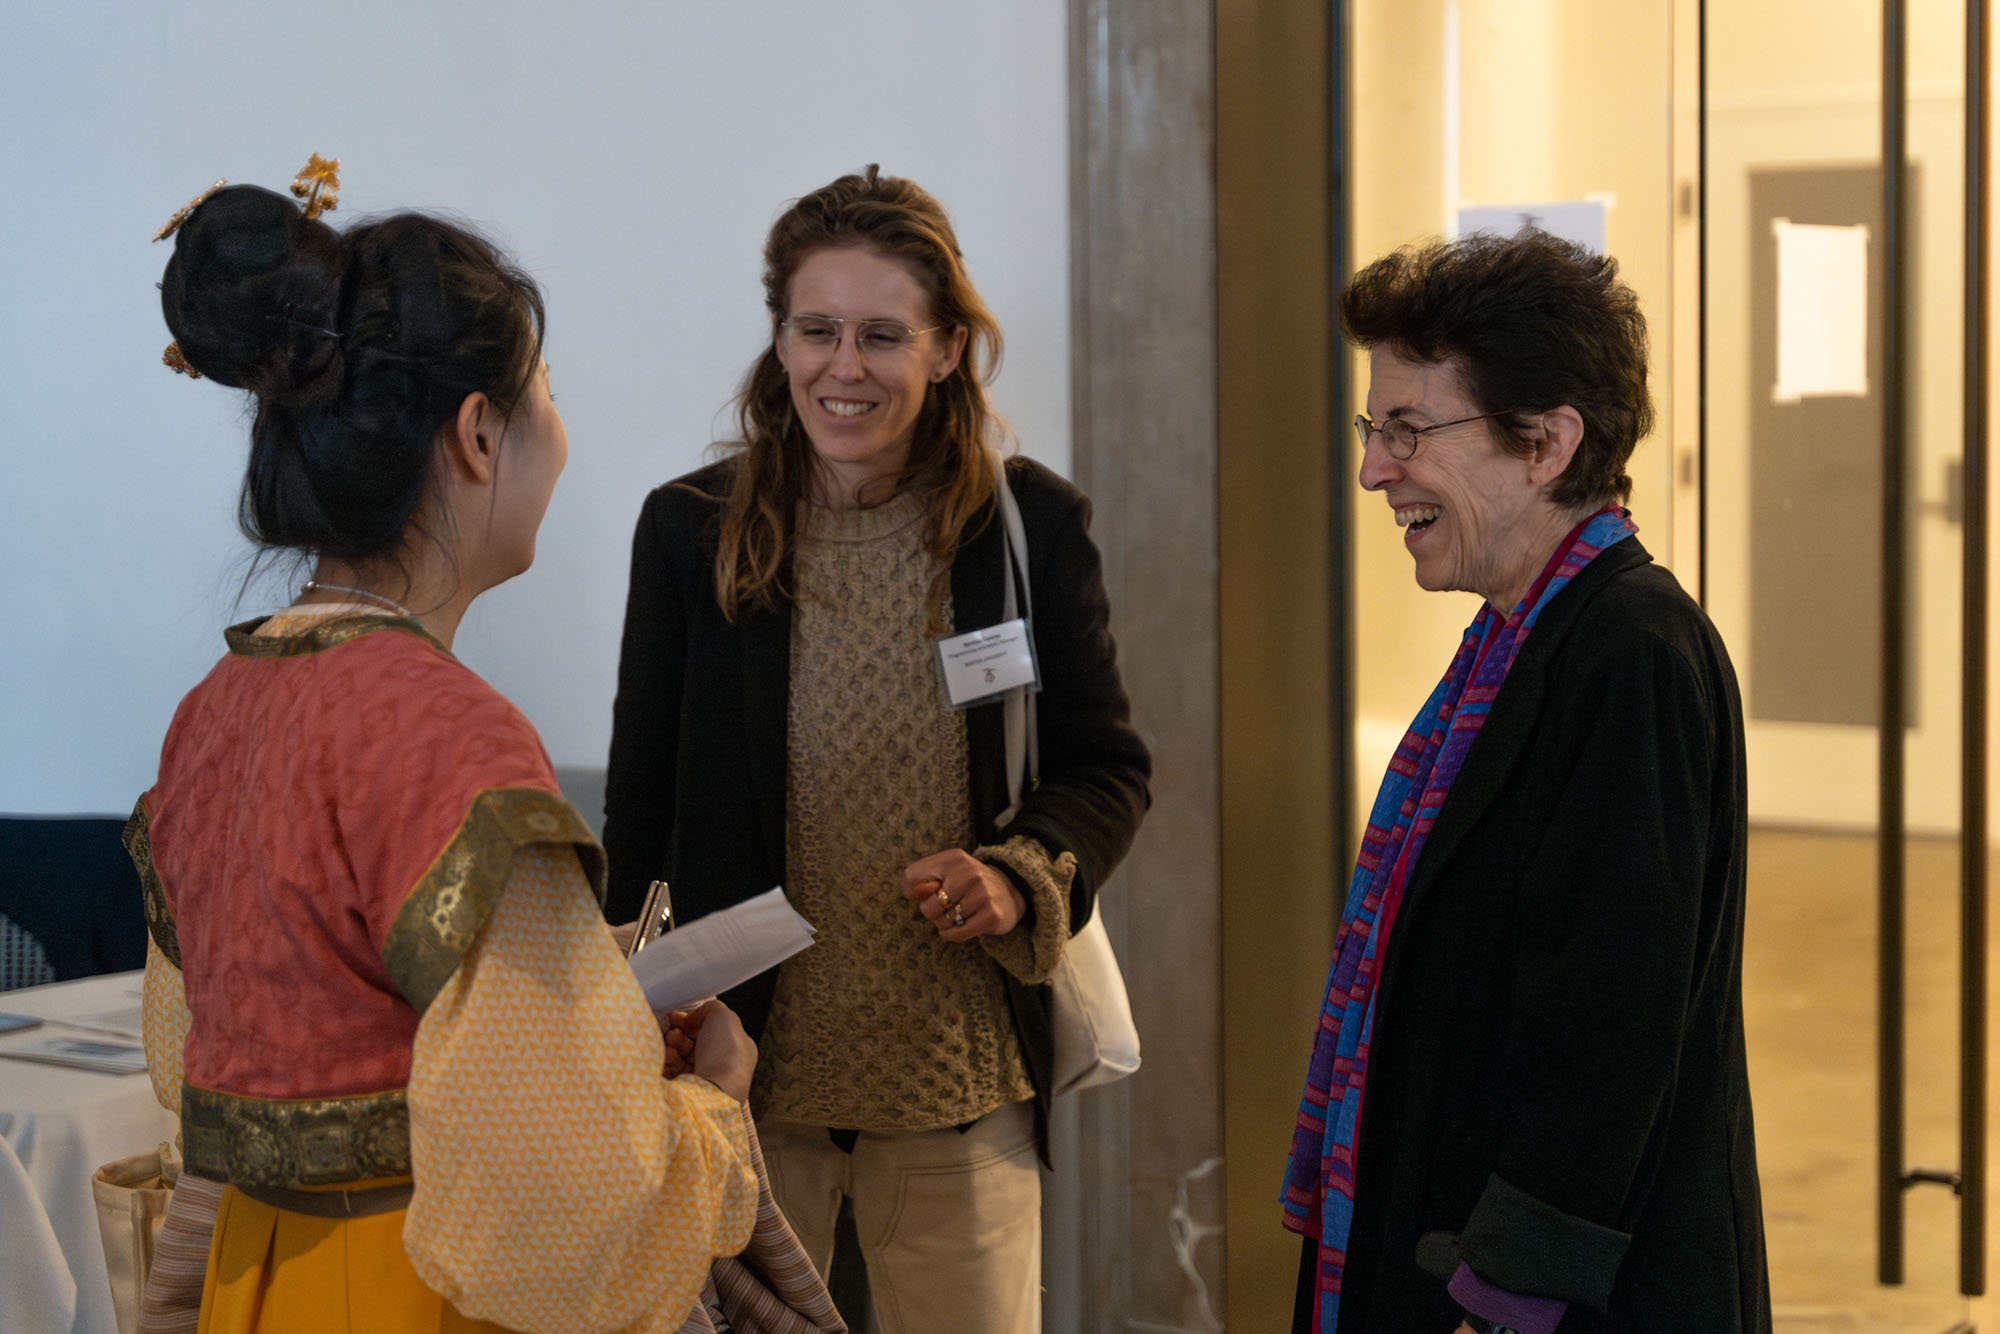 Photo: Deborah Cornell (right), a white woman with short brown hair and wearing glasses, a black blazer, and purple scarf, smiles and chats with two patrons to her left in a gallery.